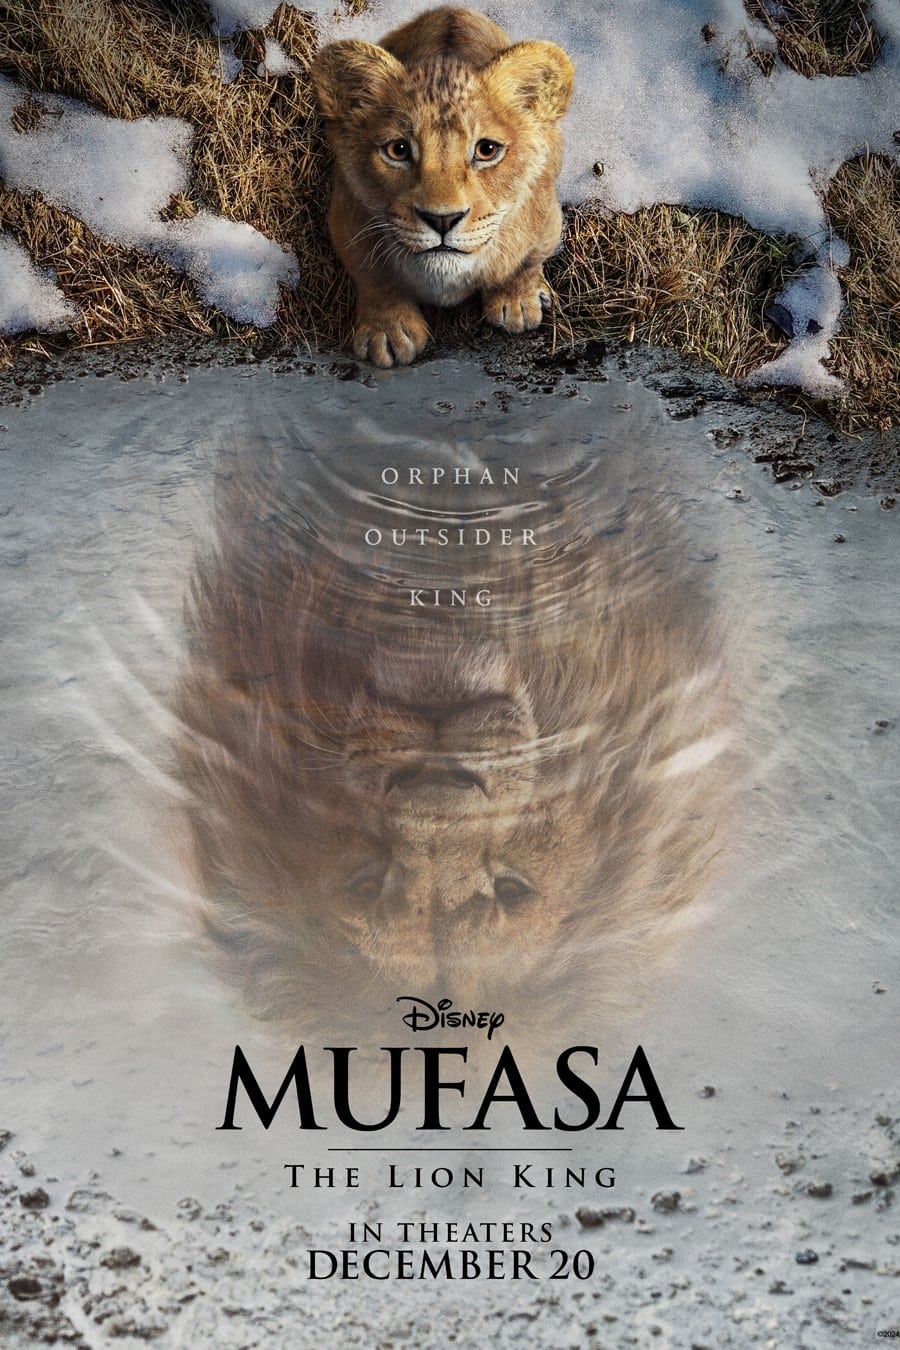 ‘Mufasa: The Lion King Teaser Trailer Shows Disney Milking Away What’s Left The 1994 Original Animated Film’